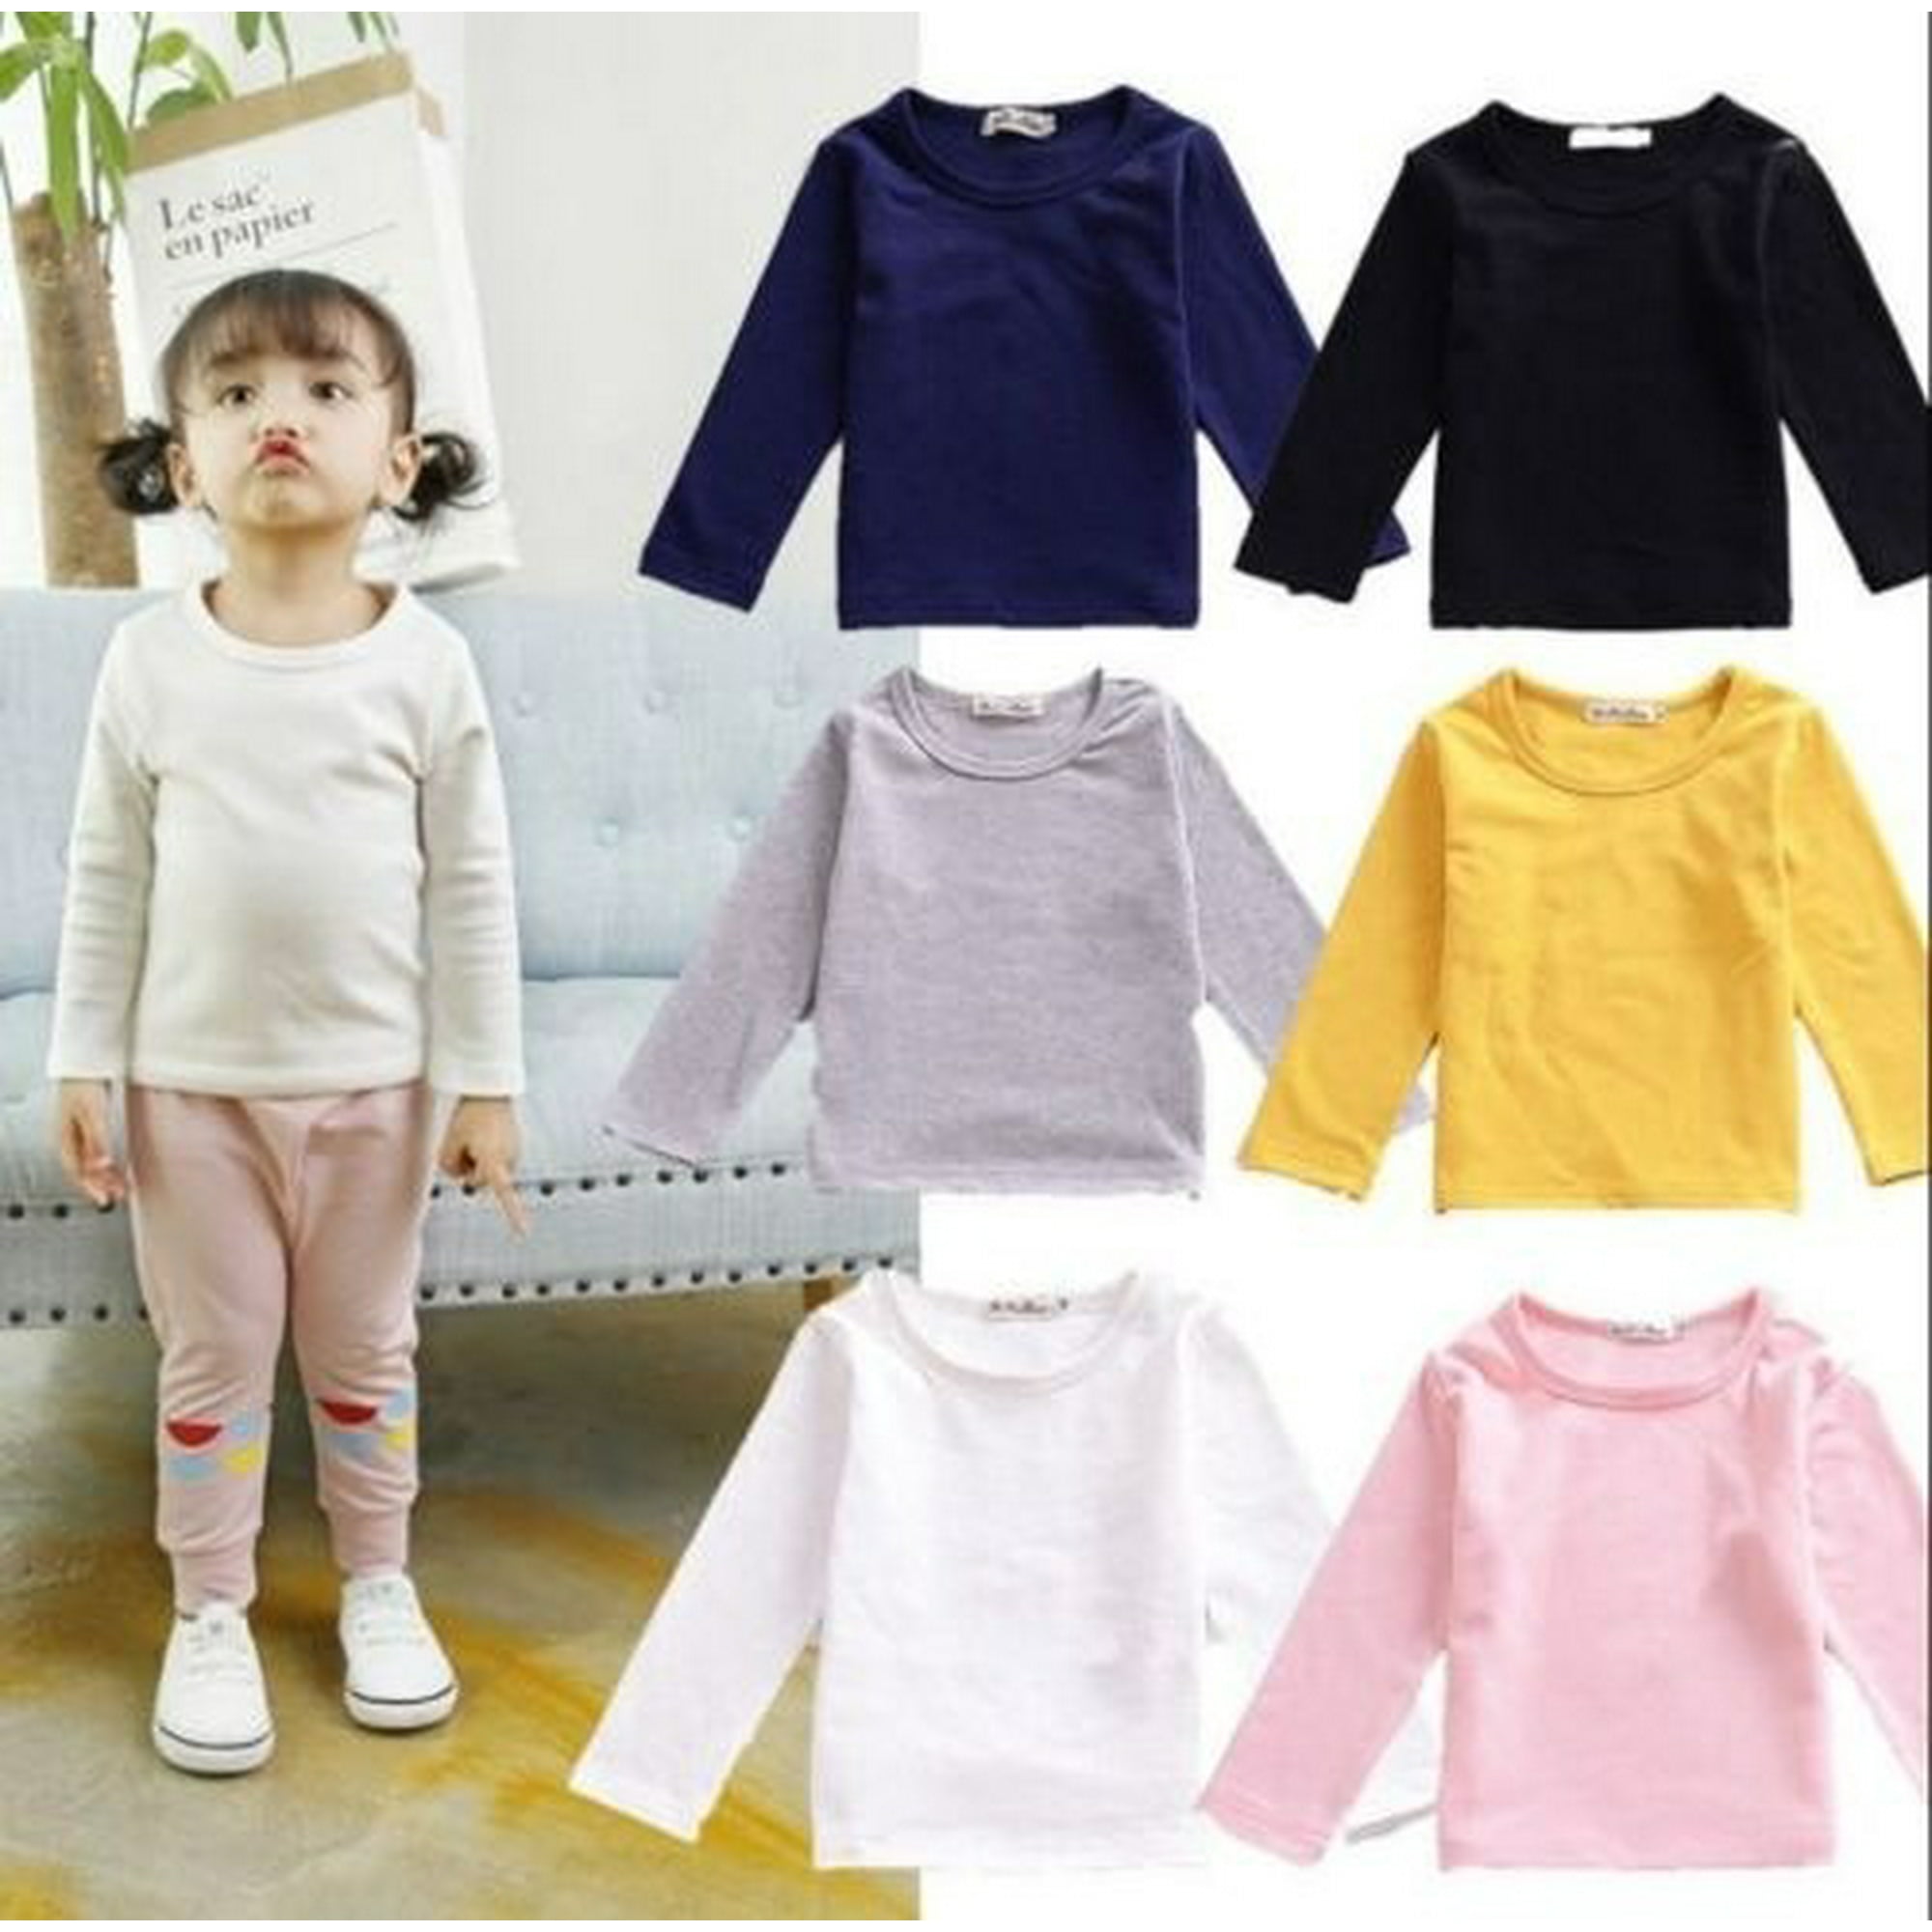 Baby Baby Long Sleeve Tops t shirt Blouse Cotton Candy Color Kids Casual Tees for Girls Children Tops 1-5Y | Walmart Canada